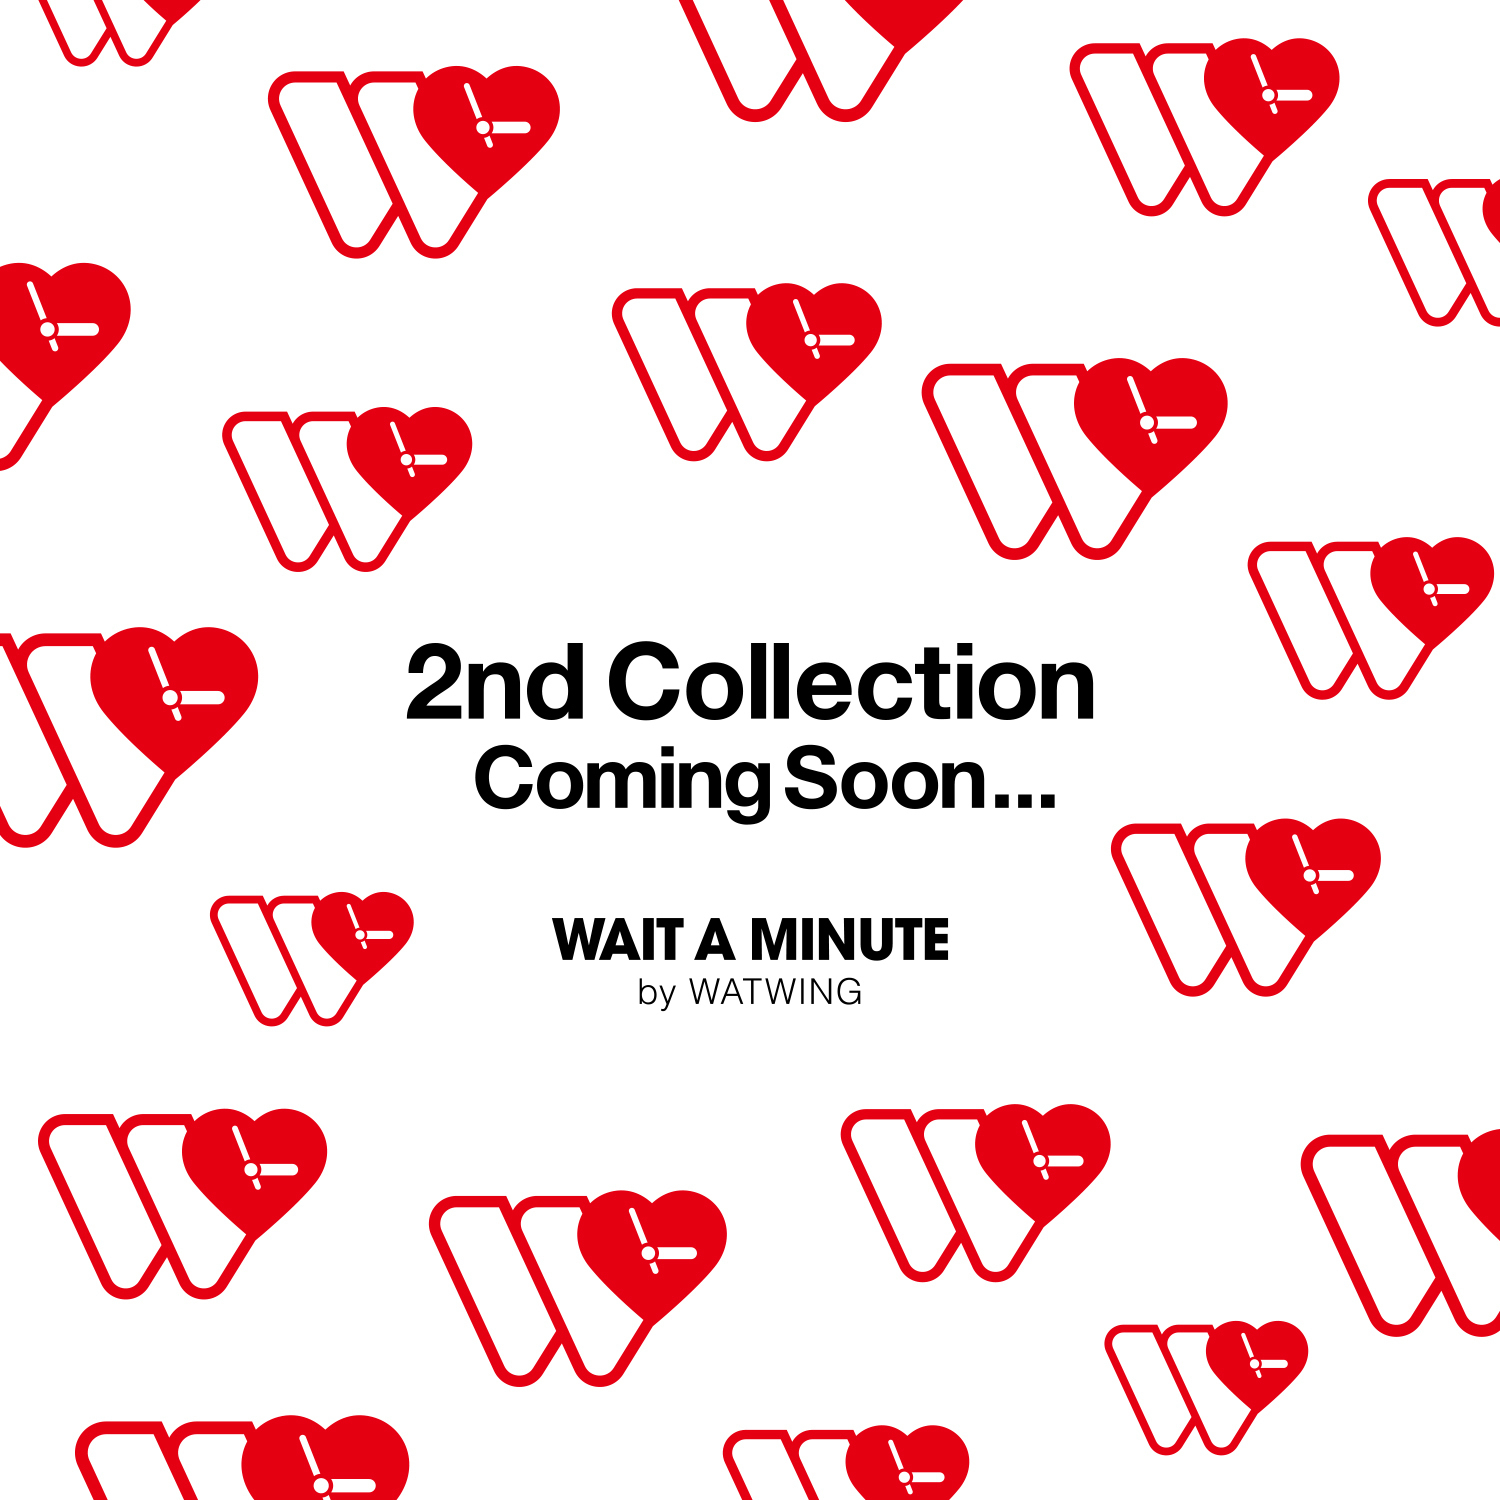 WATWINGオリジナルアパレルブランド「WAIT A MINUTE」2nd Collection